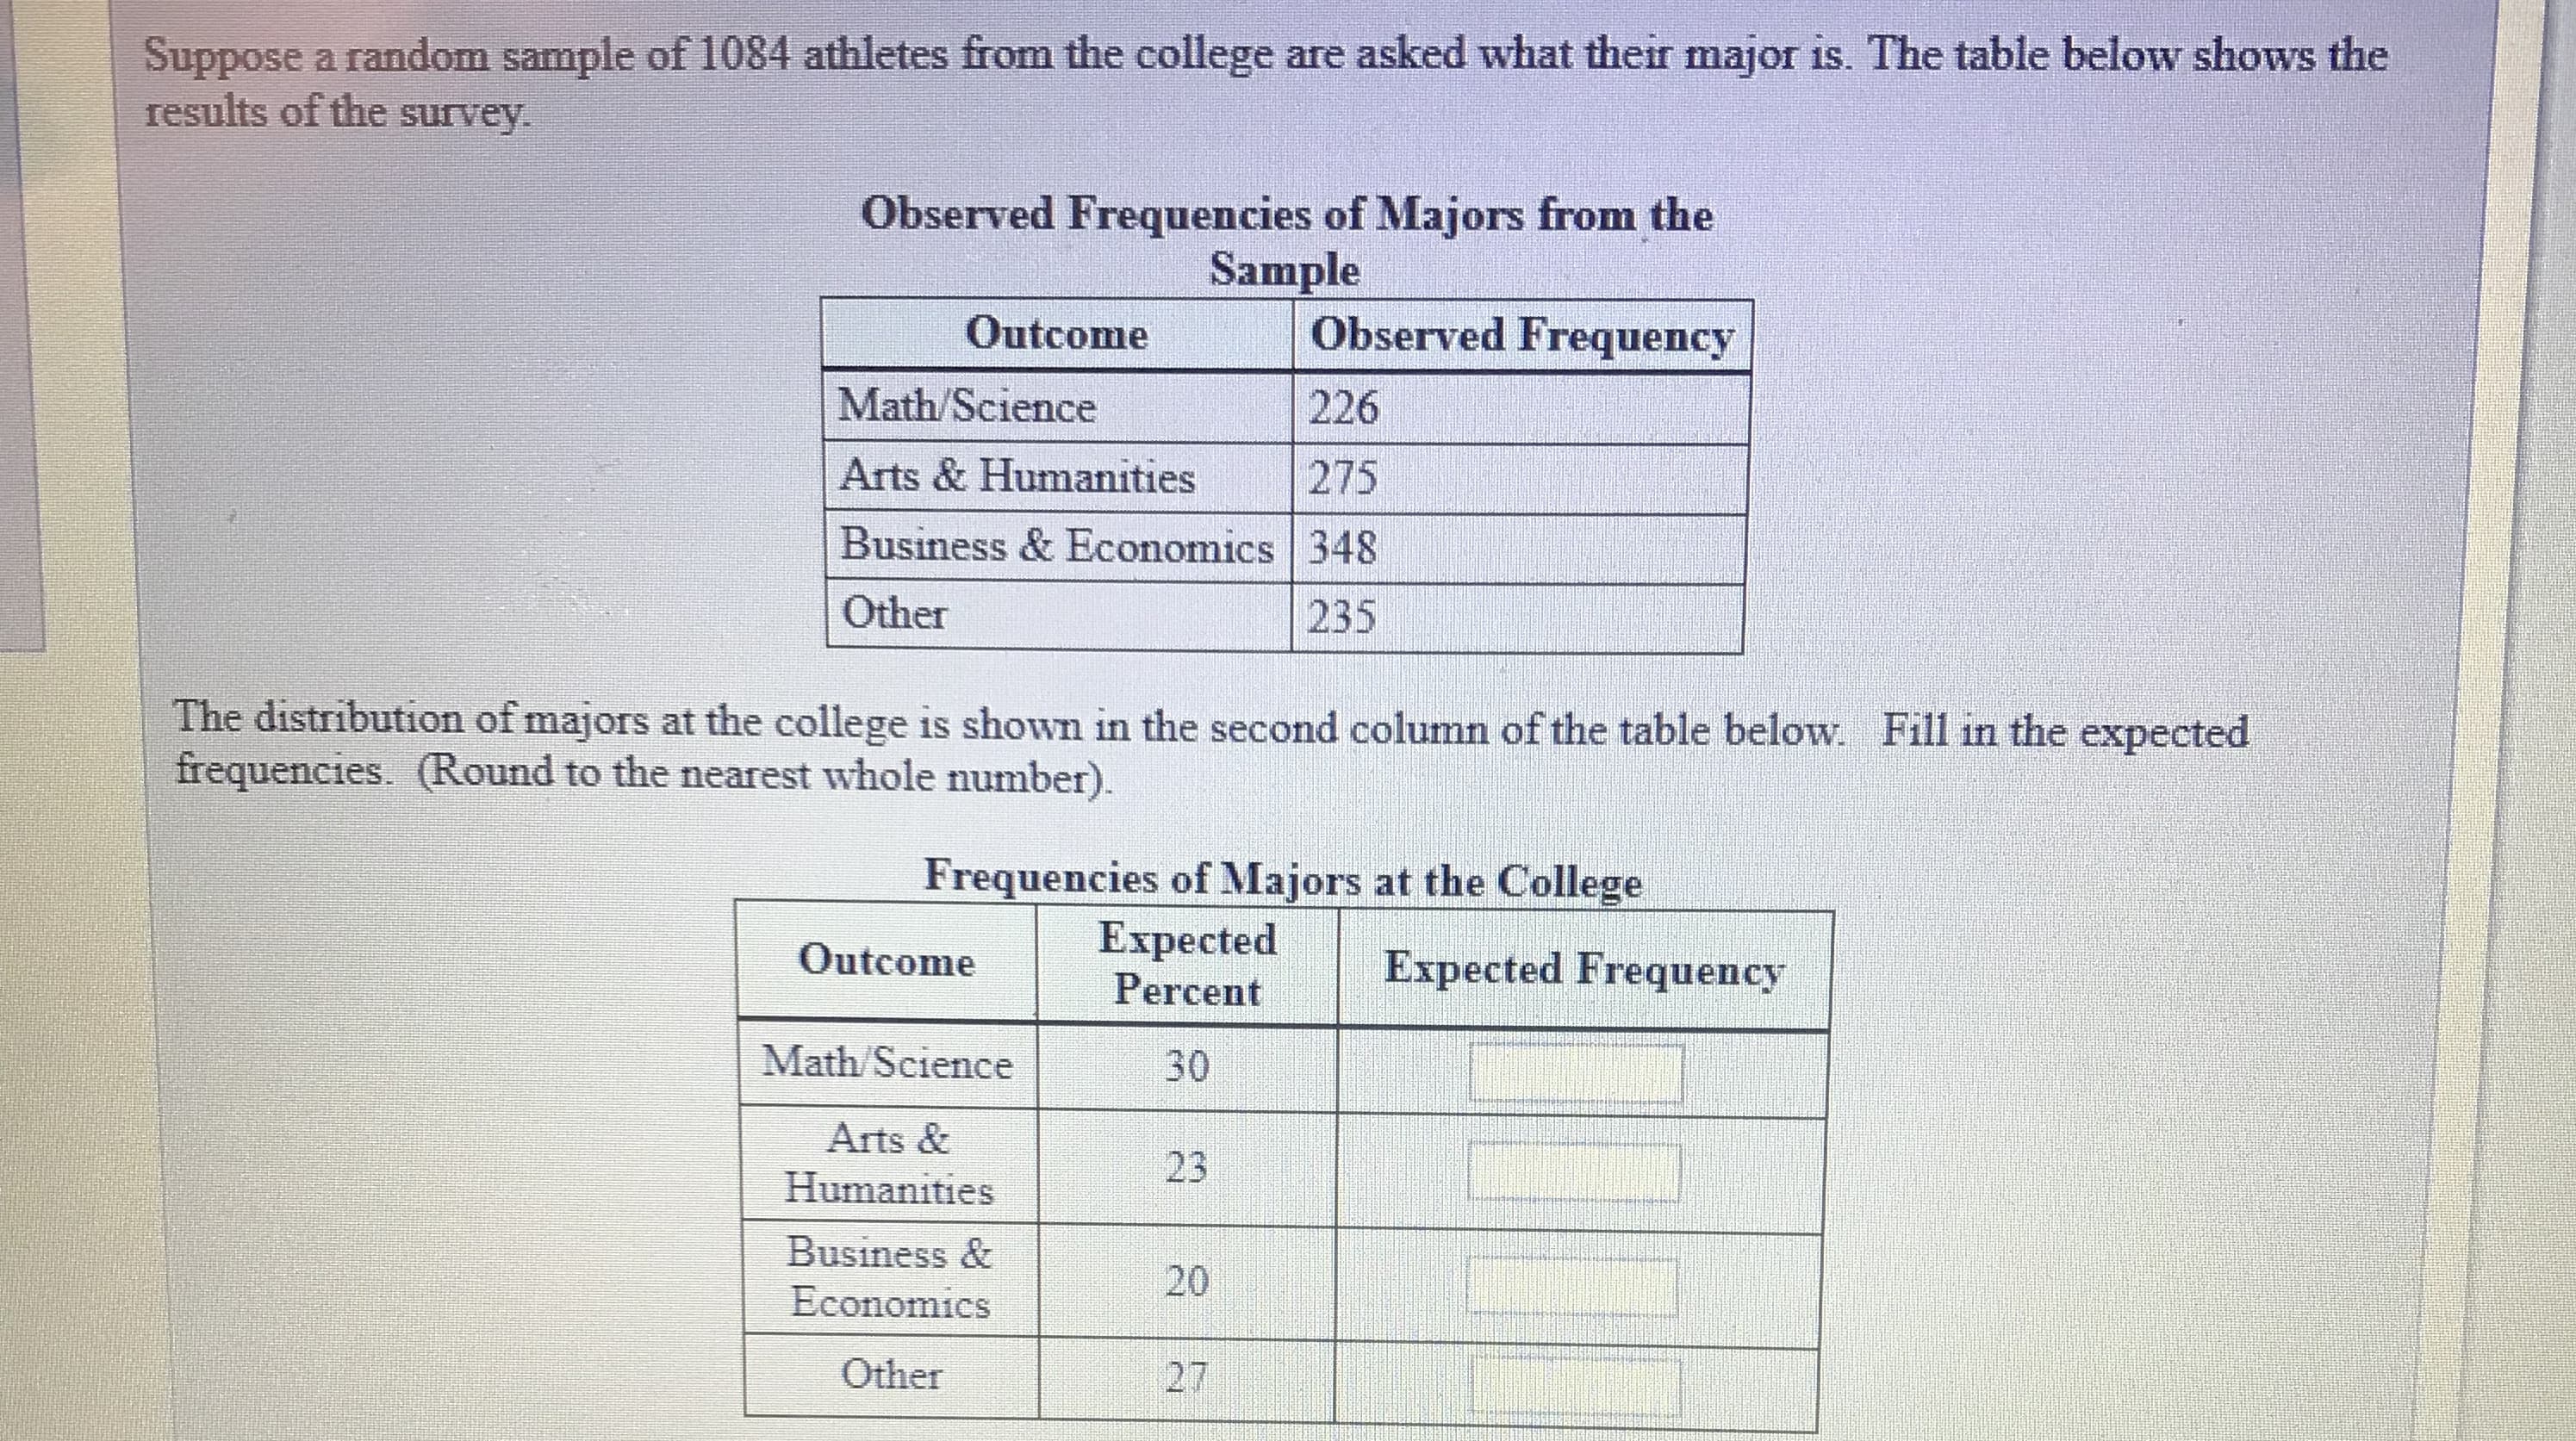 Suppose a random sample of 1084 athletes from the college are asked what their major is. The table below shows the
results of the survey.
Observed Frequencies of Majors from the
Sample
Outcome
Observed Frequency
226
Math Science
Arts & Humanities 275
Business & Economics 348
Other
235
The distribution of majors at the college is shown in the second column of the table below. Fill in the expected
frequencies. (Round to the nearest whole number).
Frequencies of Majors at the College
uoExpected Frequency
OutcomeExpected
Math Science
Arts &
Humanities
Business &
Economics
Other
30
23
20
27
